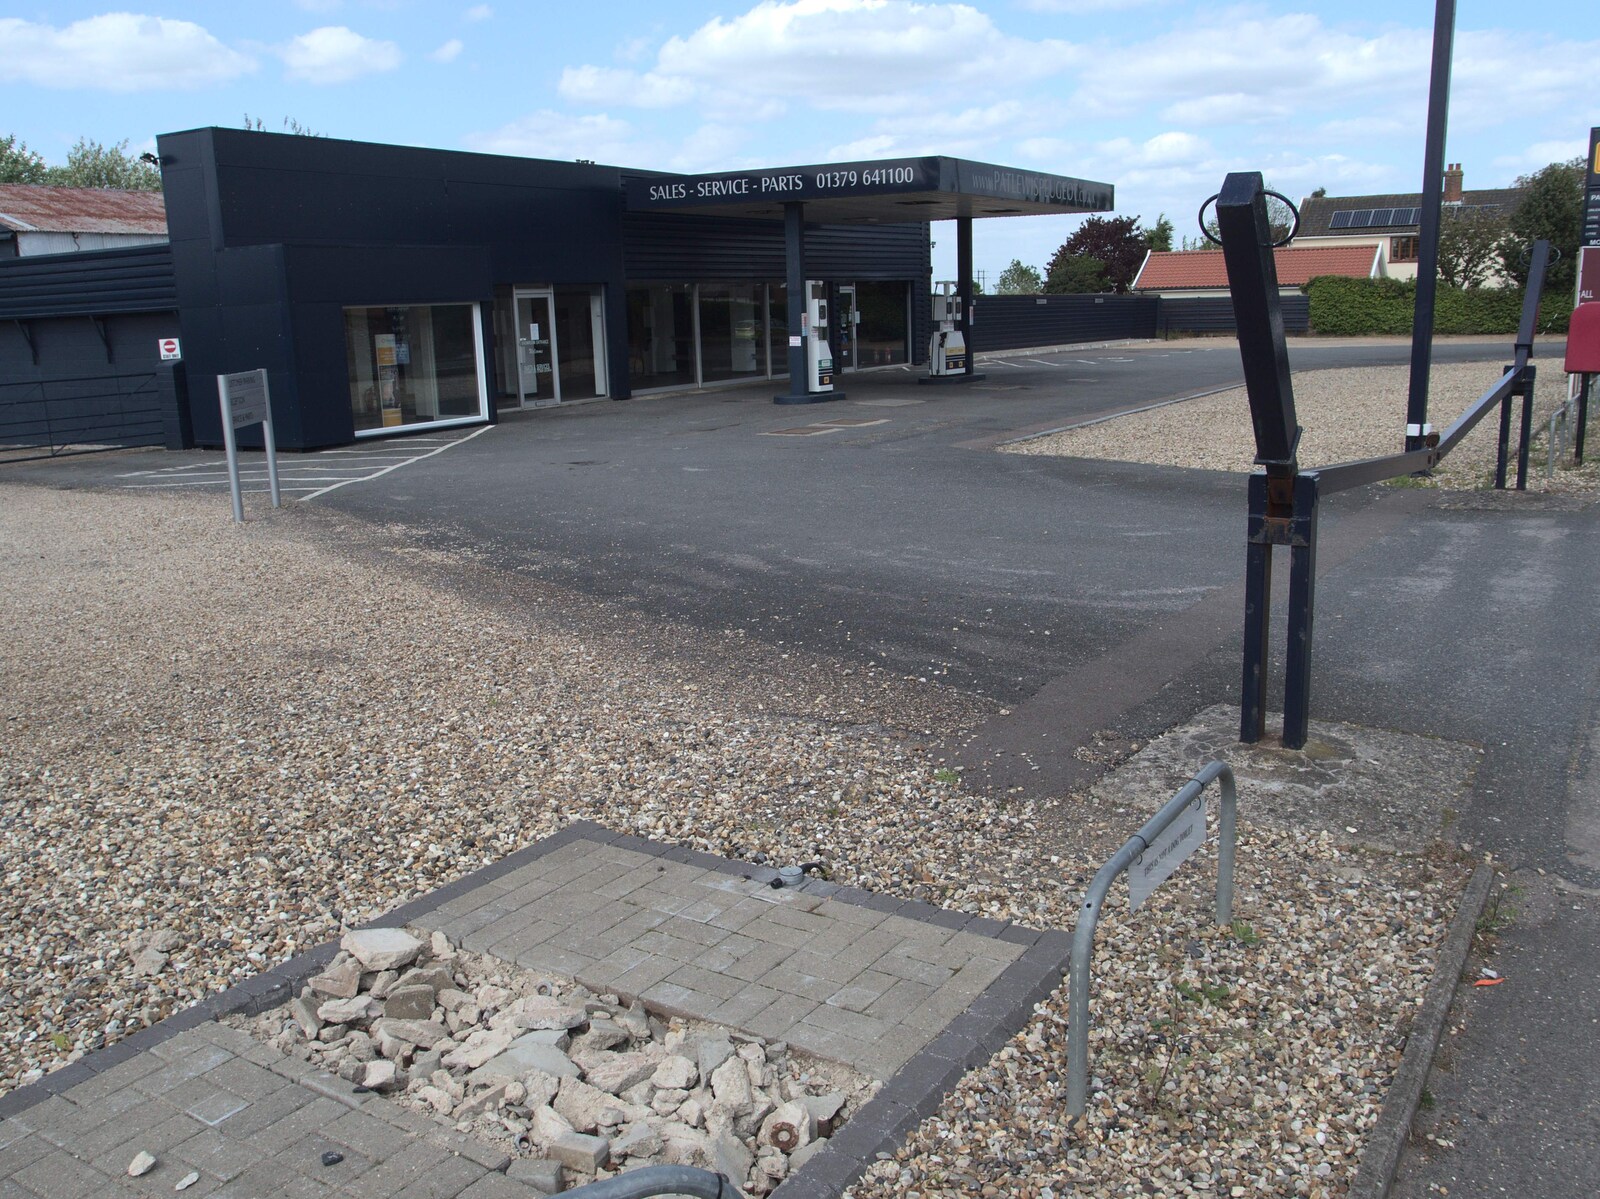 The wasteland of another closed petrol station from A Derelict Petrol Station, Palgrave, Suffolk - 16th May 2015